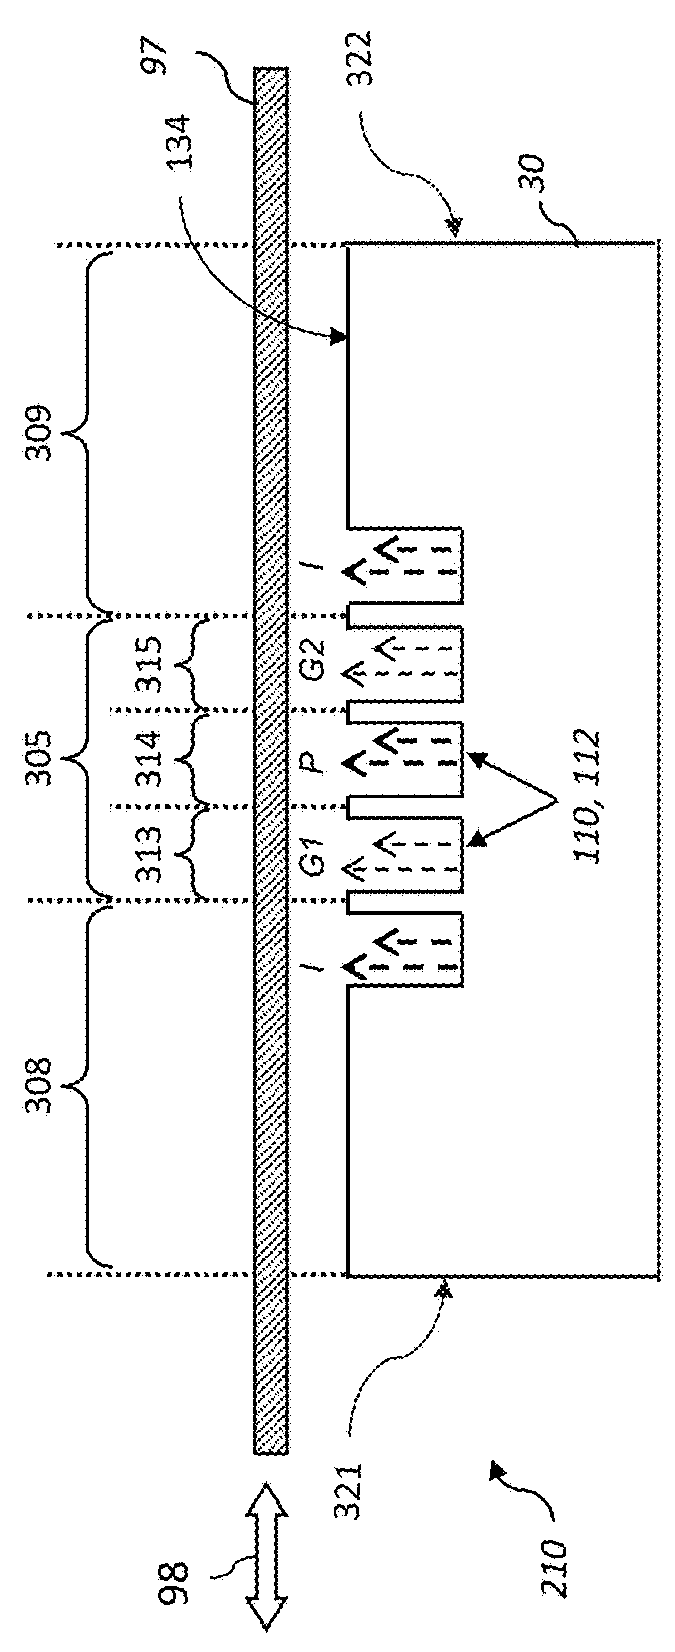 Deposition system with moveable-position web guides